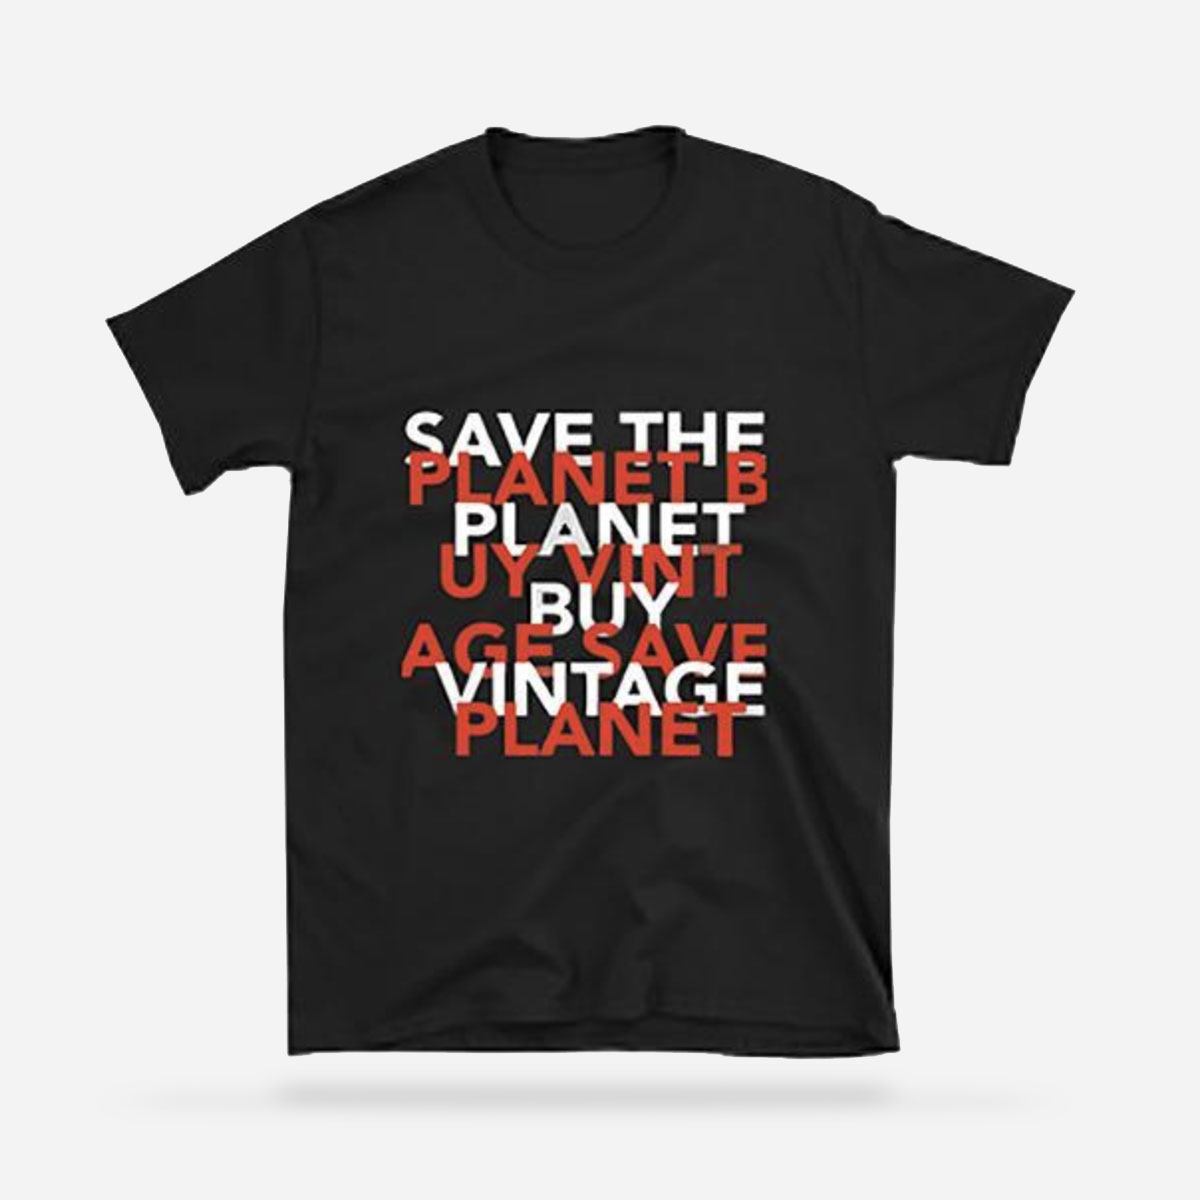 Save the planet t-shirt, black tee